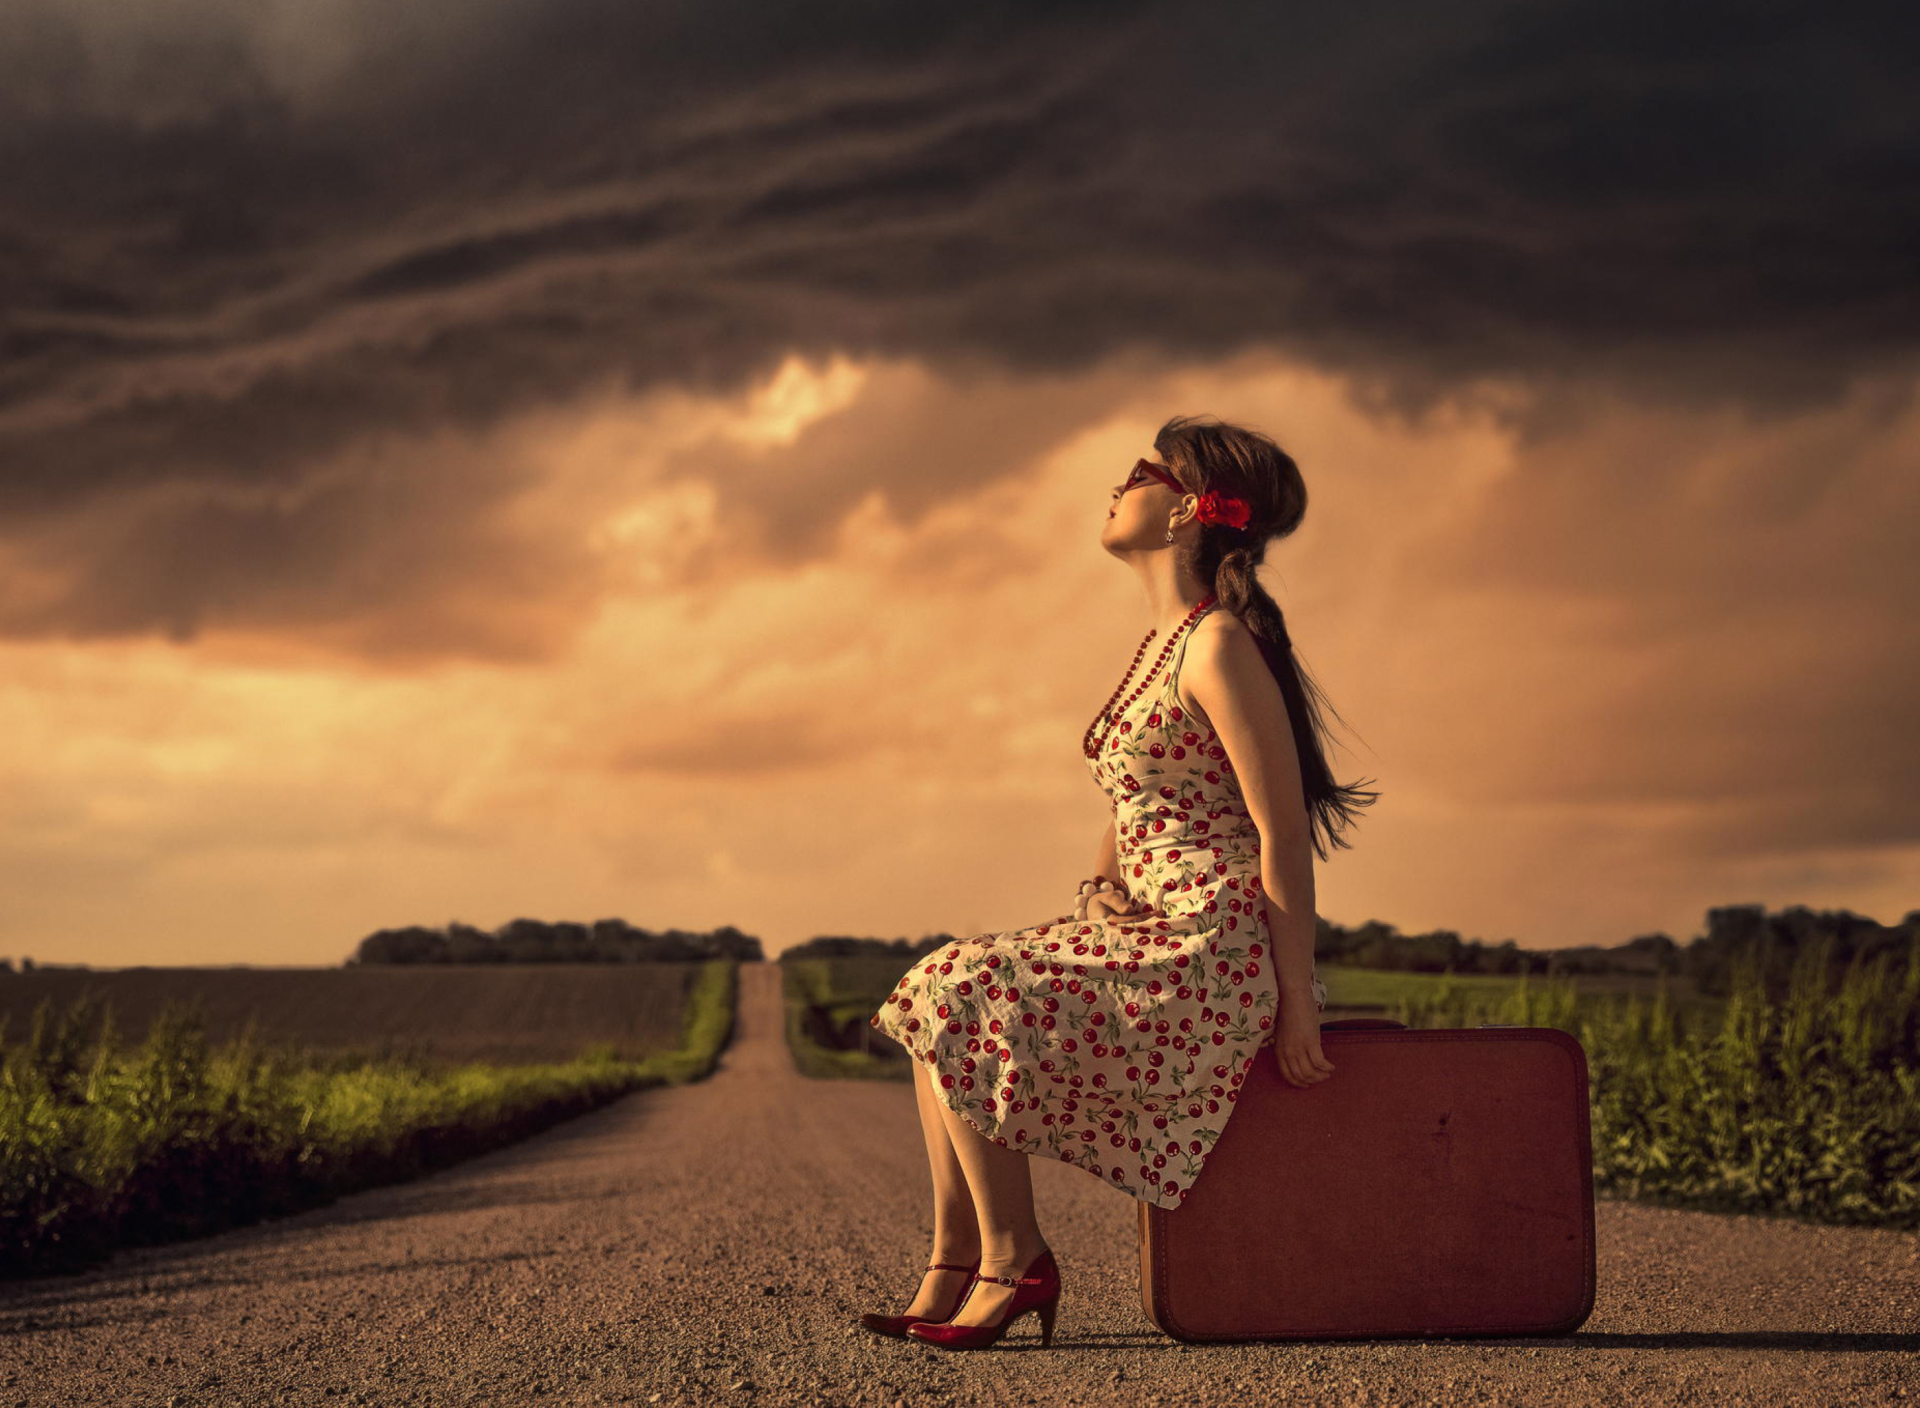 Girl Sitting On Luggage On Road wallpaper 1920x1408